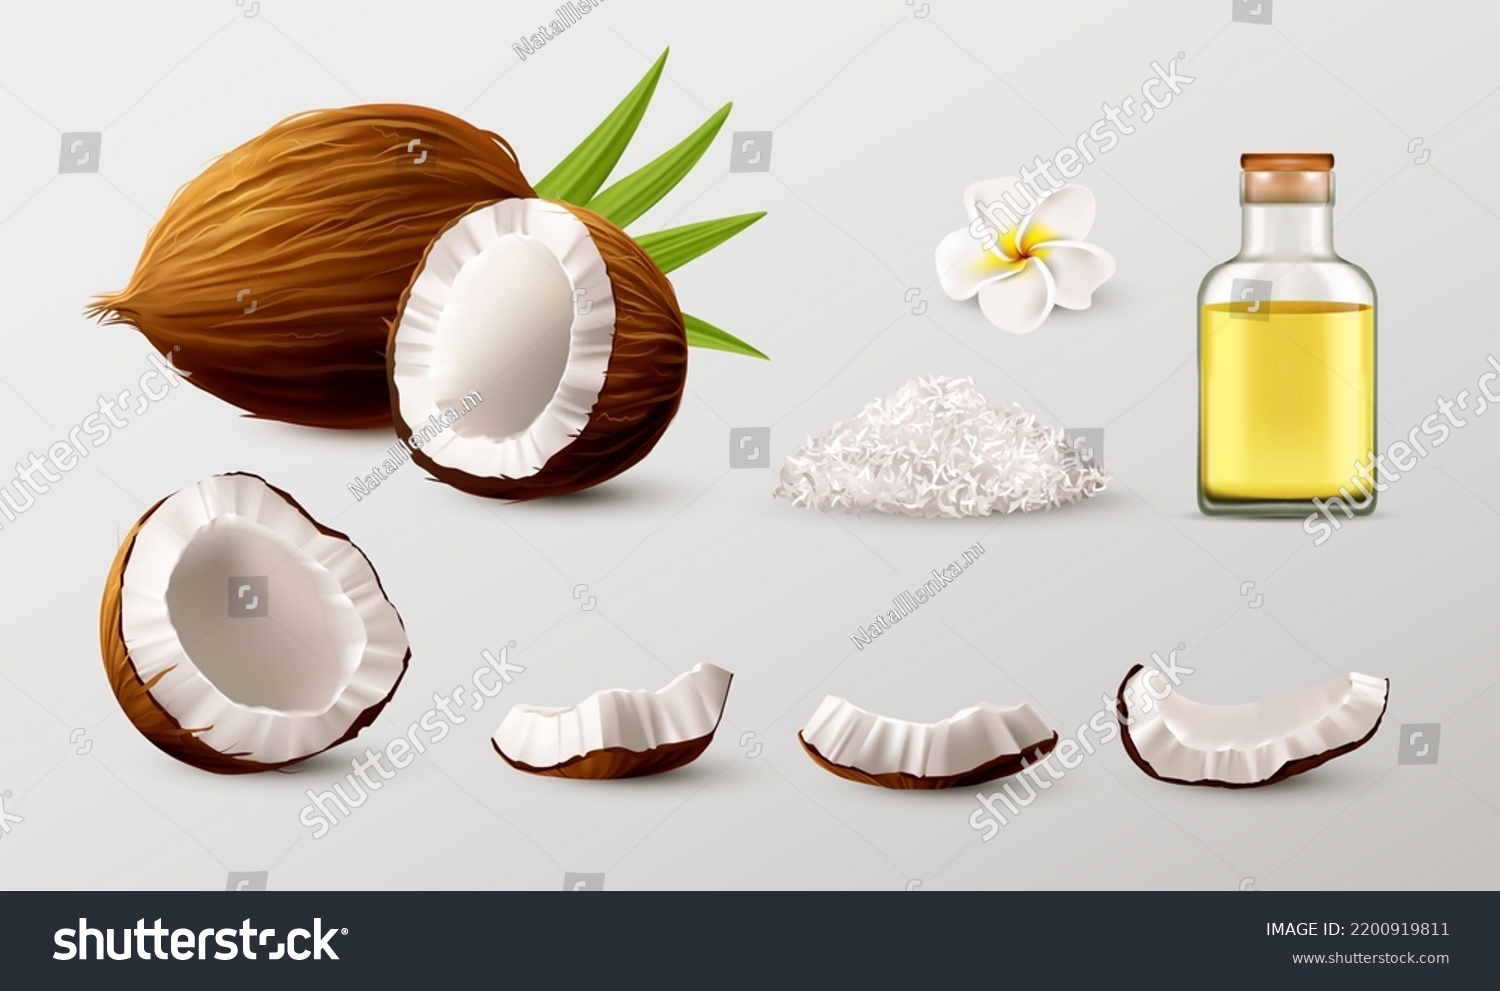 SVG of 3d coconut set. Nuts and oil in blank glass bottle, realistic coco flowers and palm leaves. Tropical milk drink ingredient, whole slice and piece. Natural raw food. Vector illustration set svg